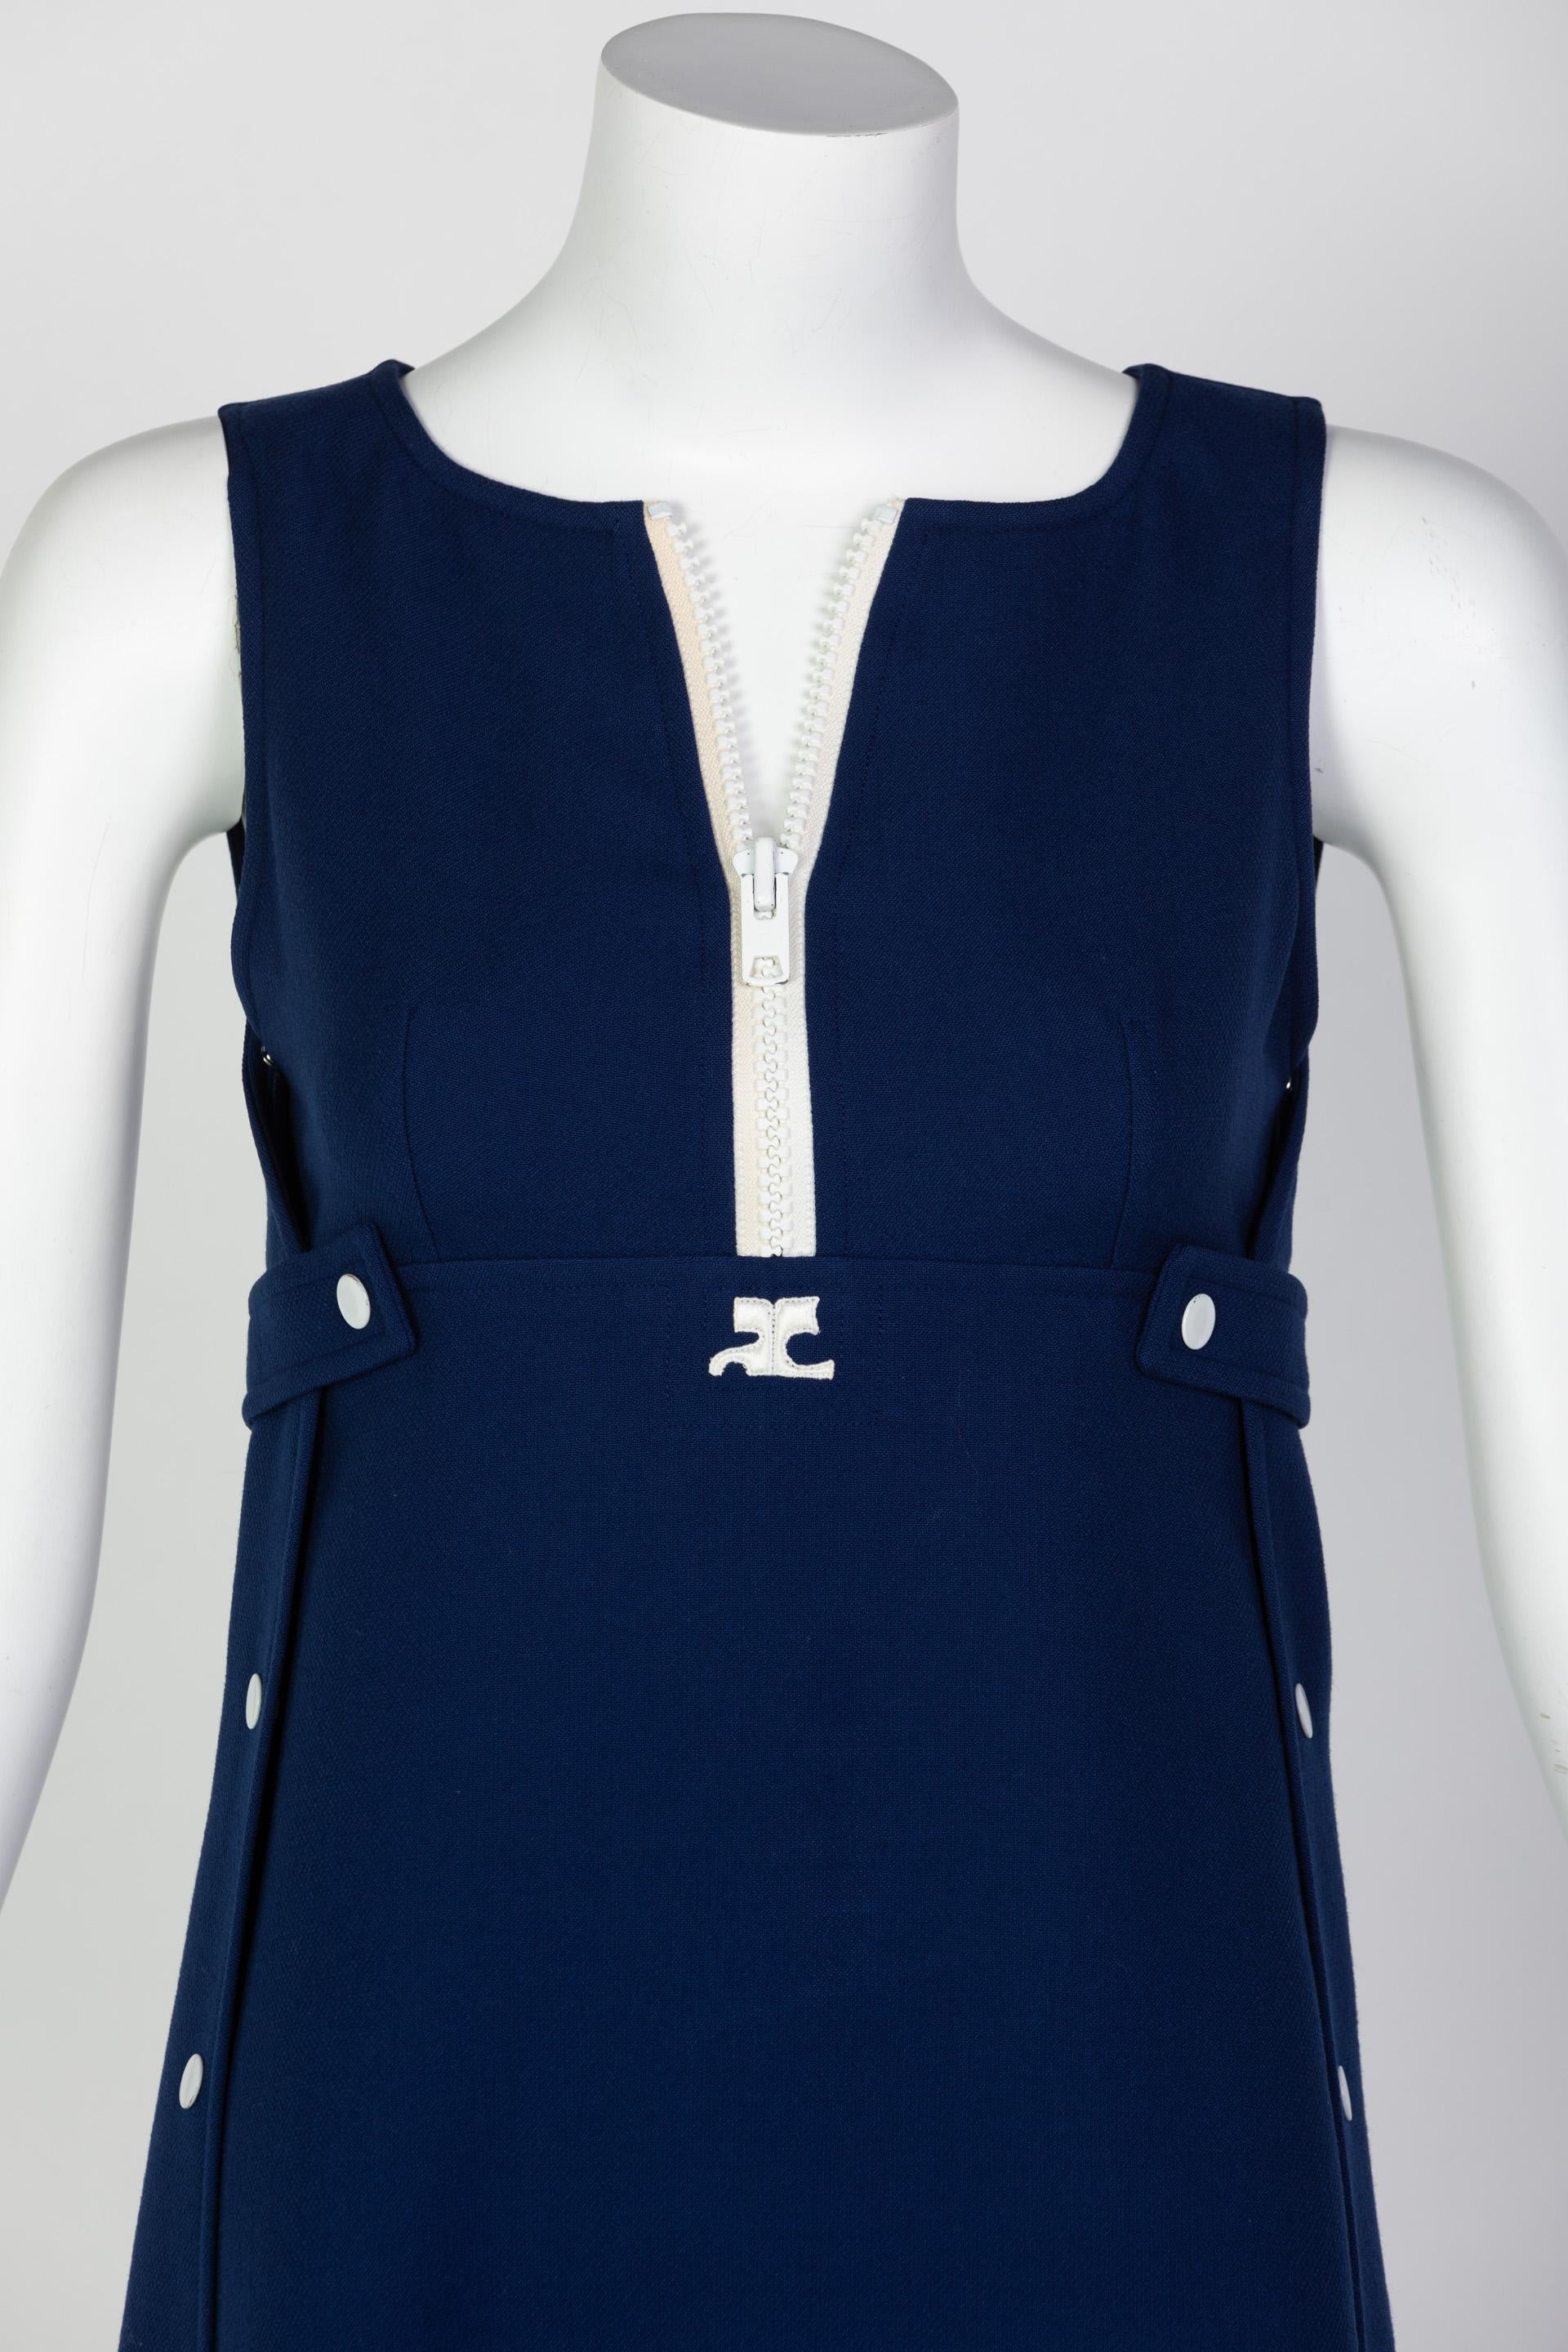 Courreges Numbered Couture Navy White Wool Zipper Mod Space-Age Dress, 1970s For Sale 3